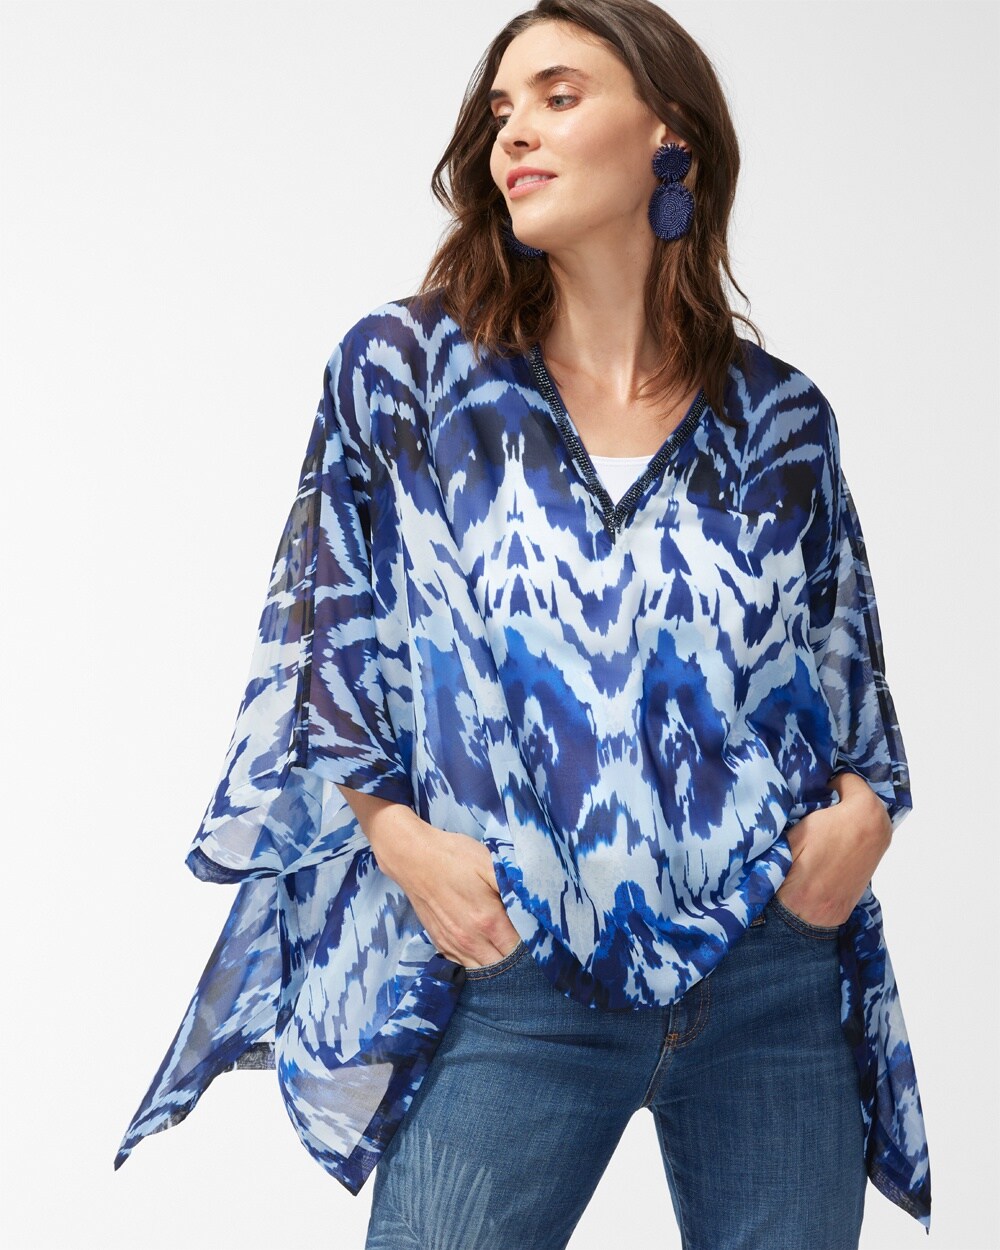 Embroidered V-Neck Poncho video preview image, click to start video